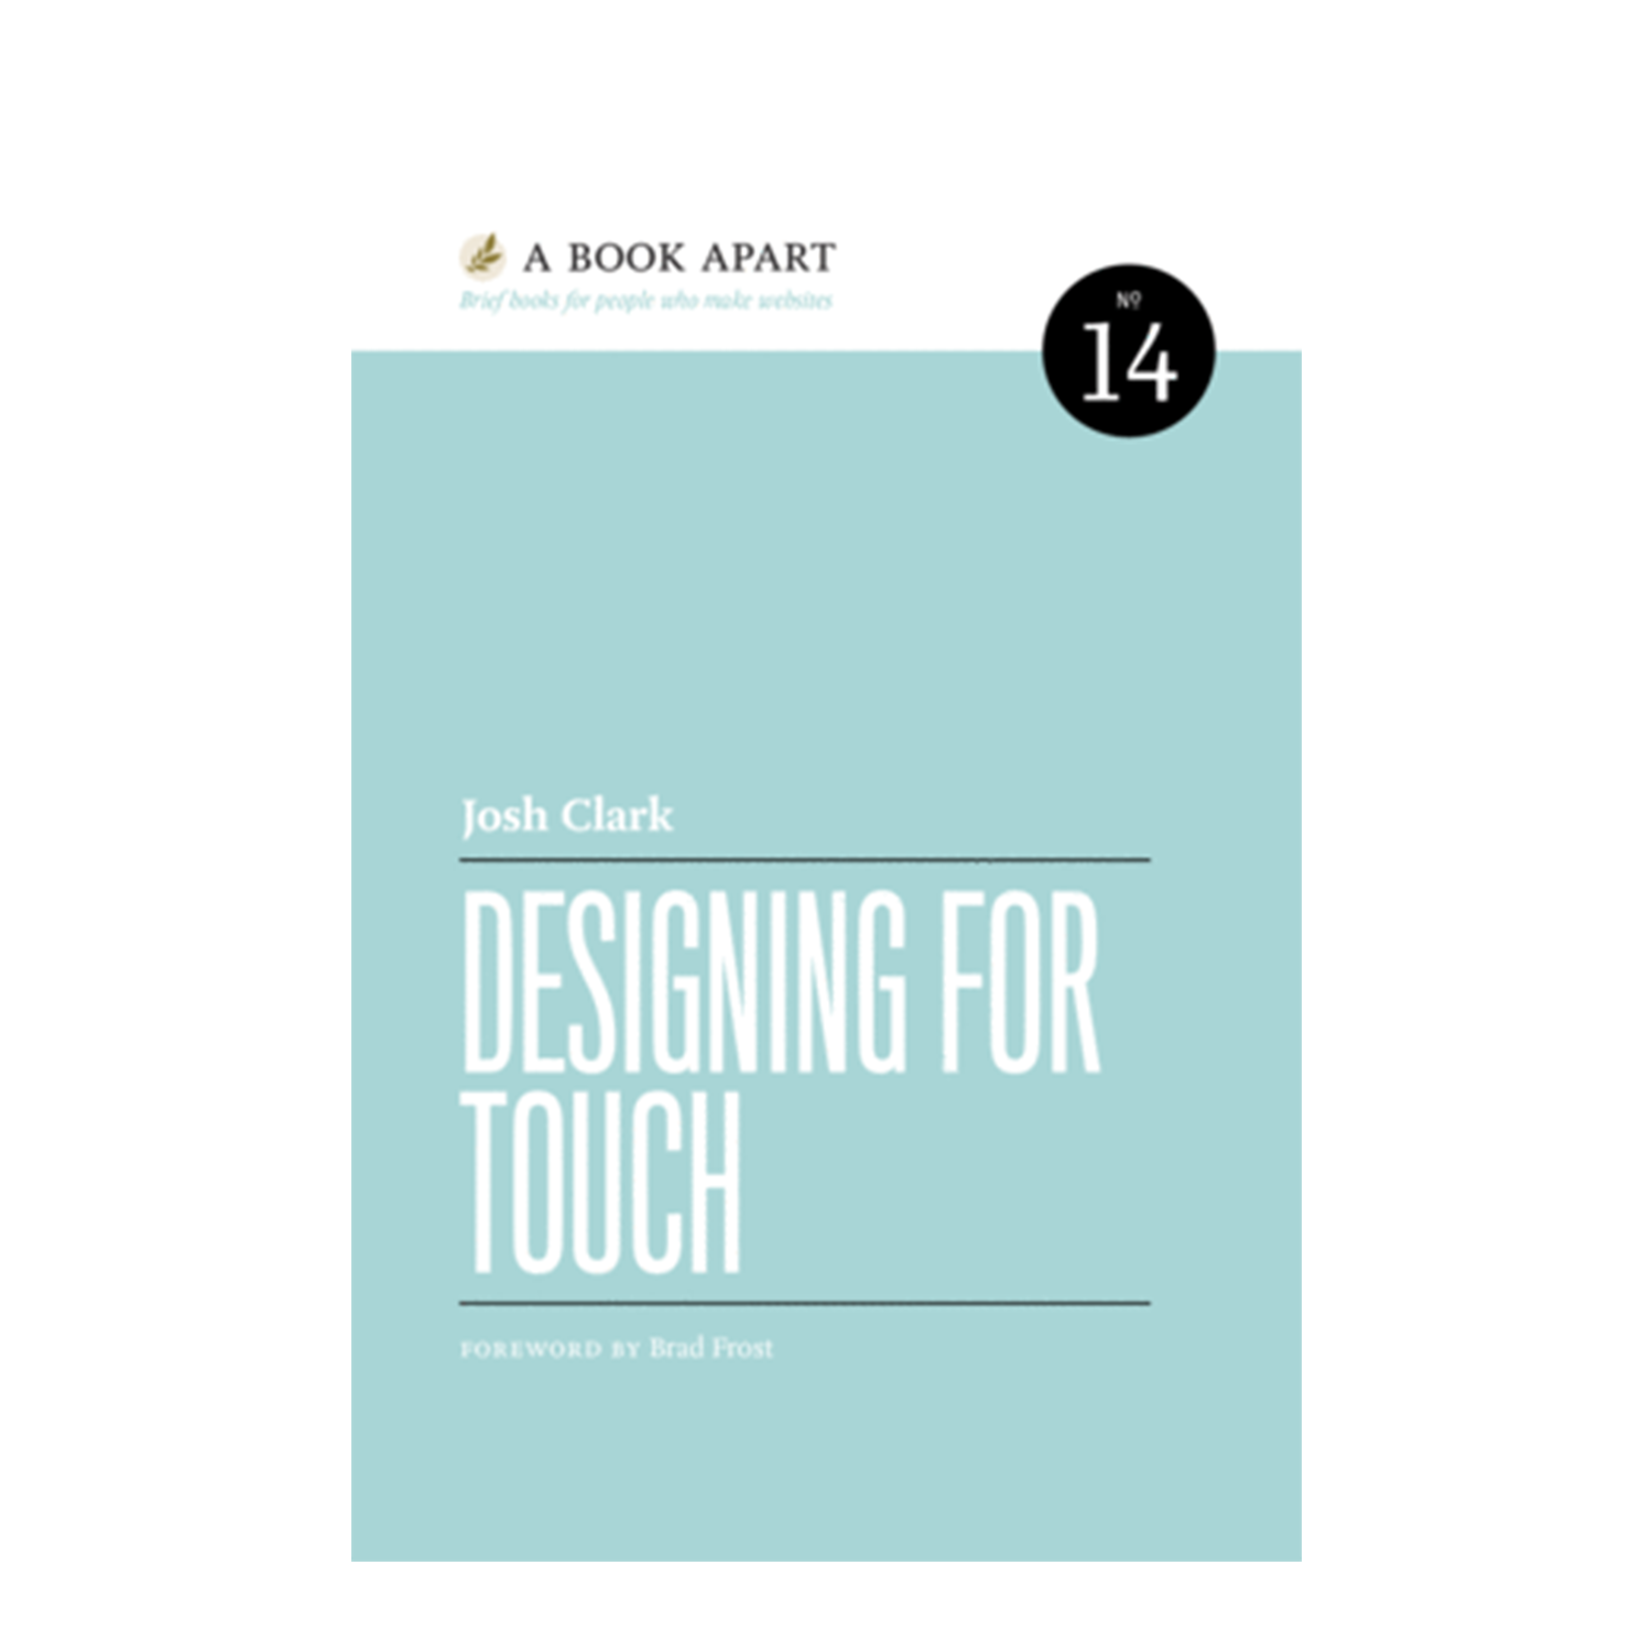 A Book Apart: Designing for Touch (No. 14)